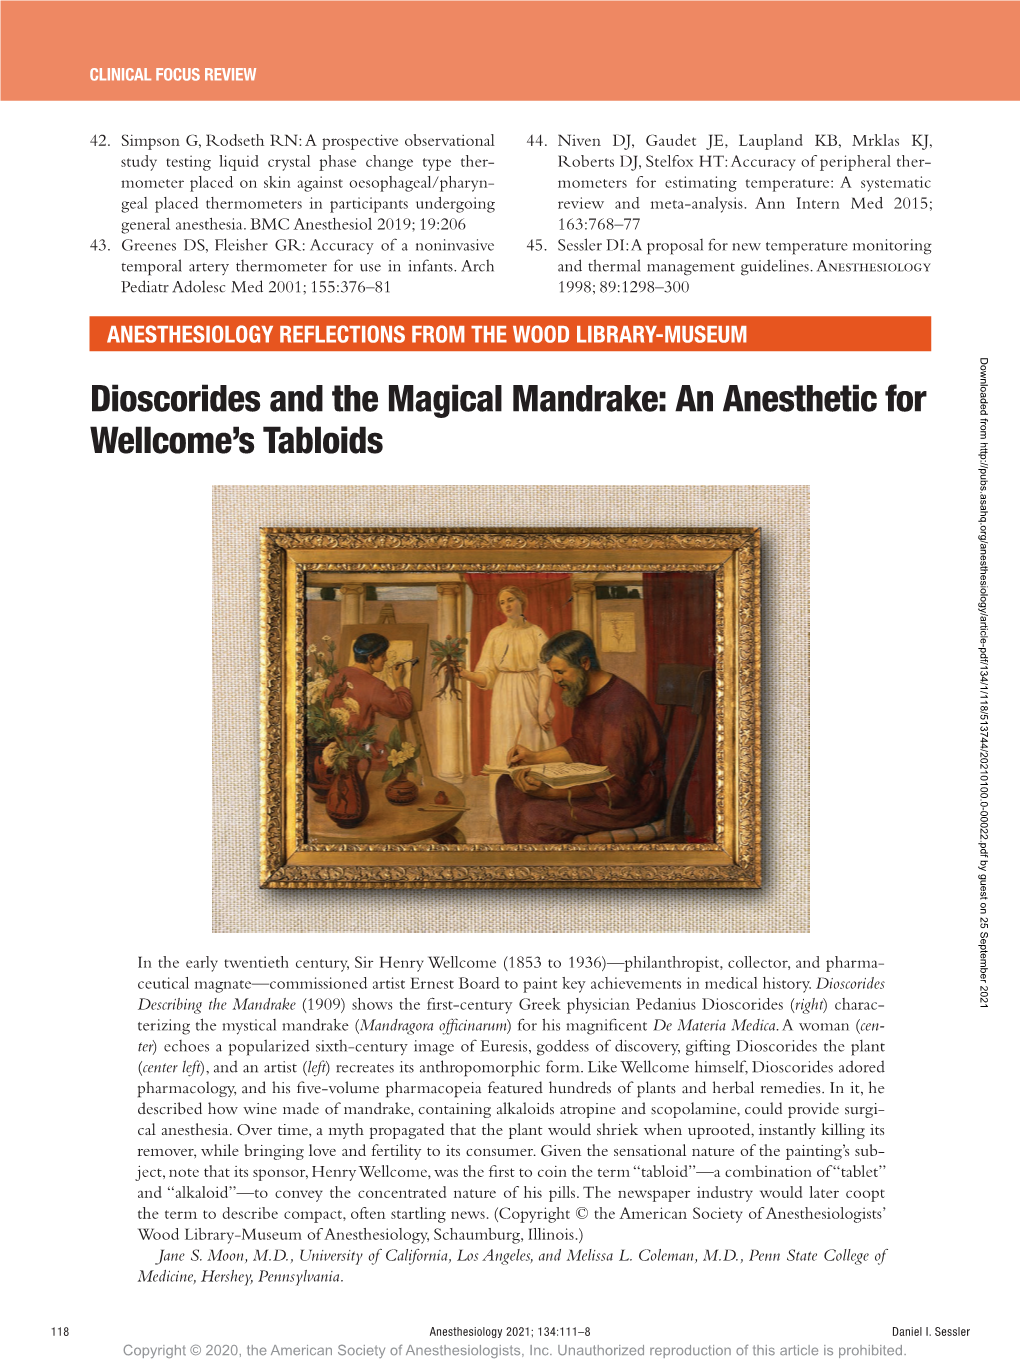 Dioscorides and the Magical Mandrake: an Anesthetic for Wellcome’S Tabloids